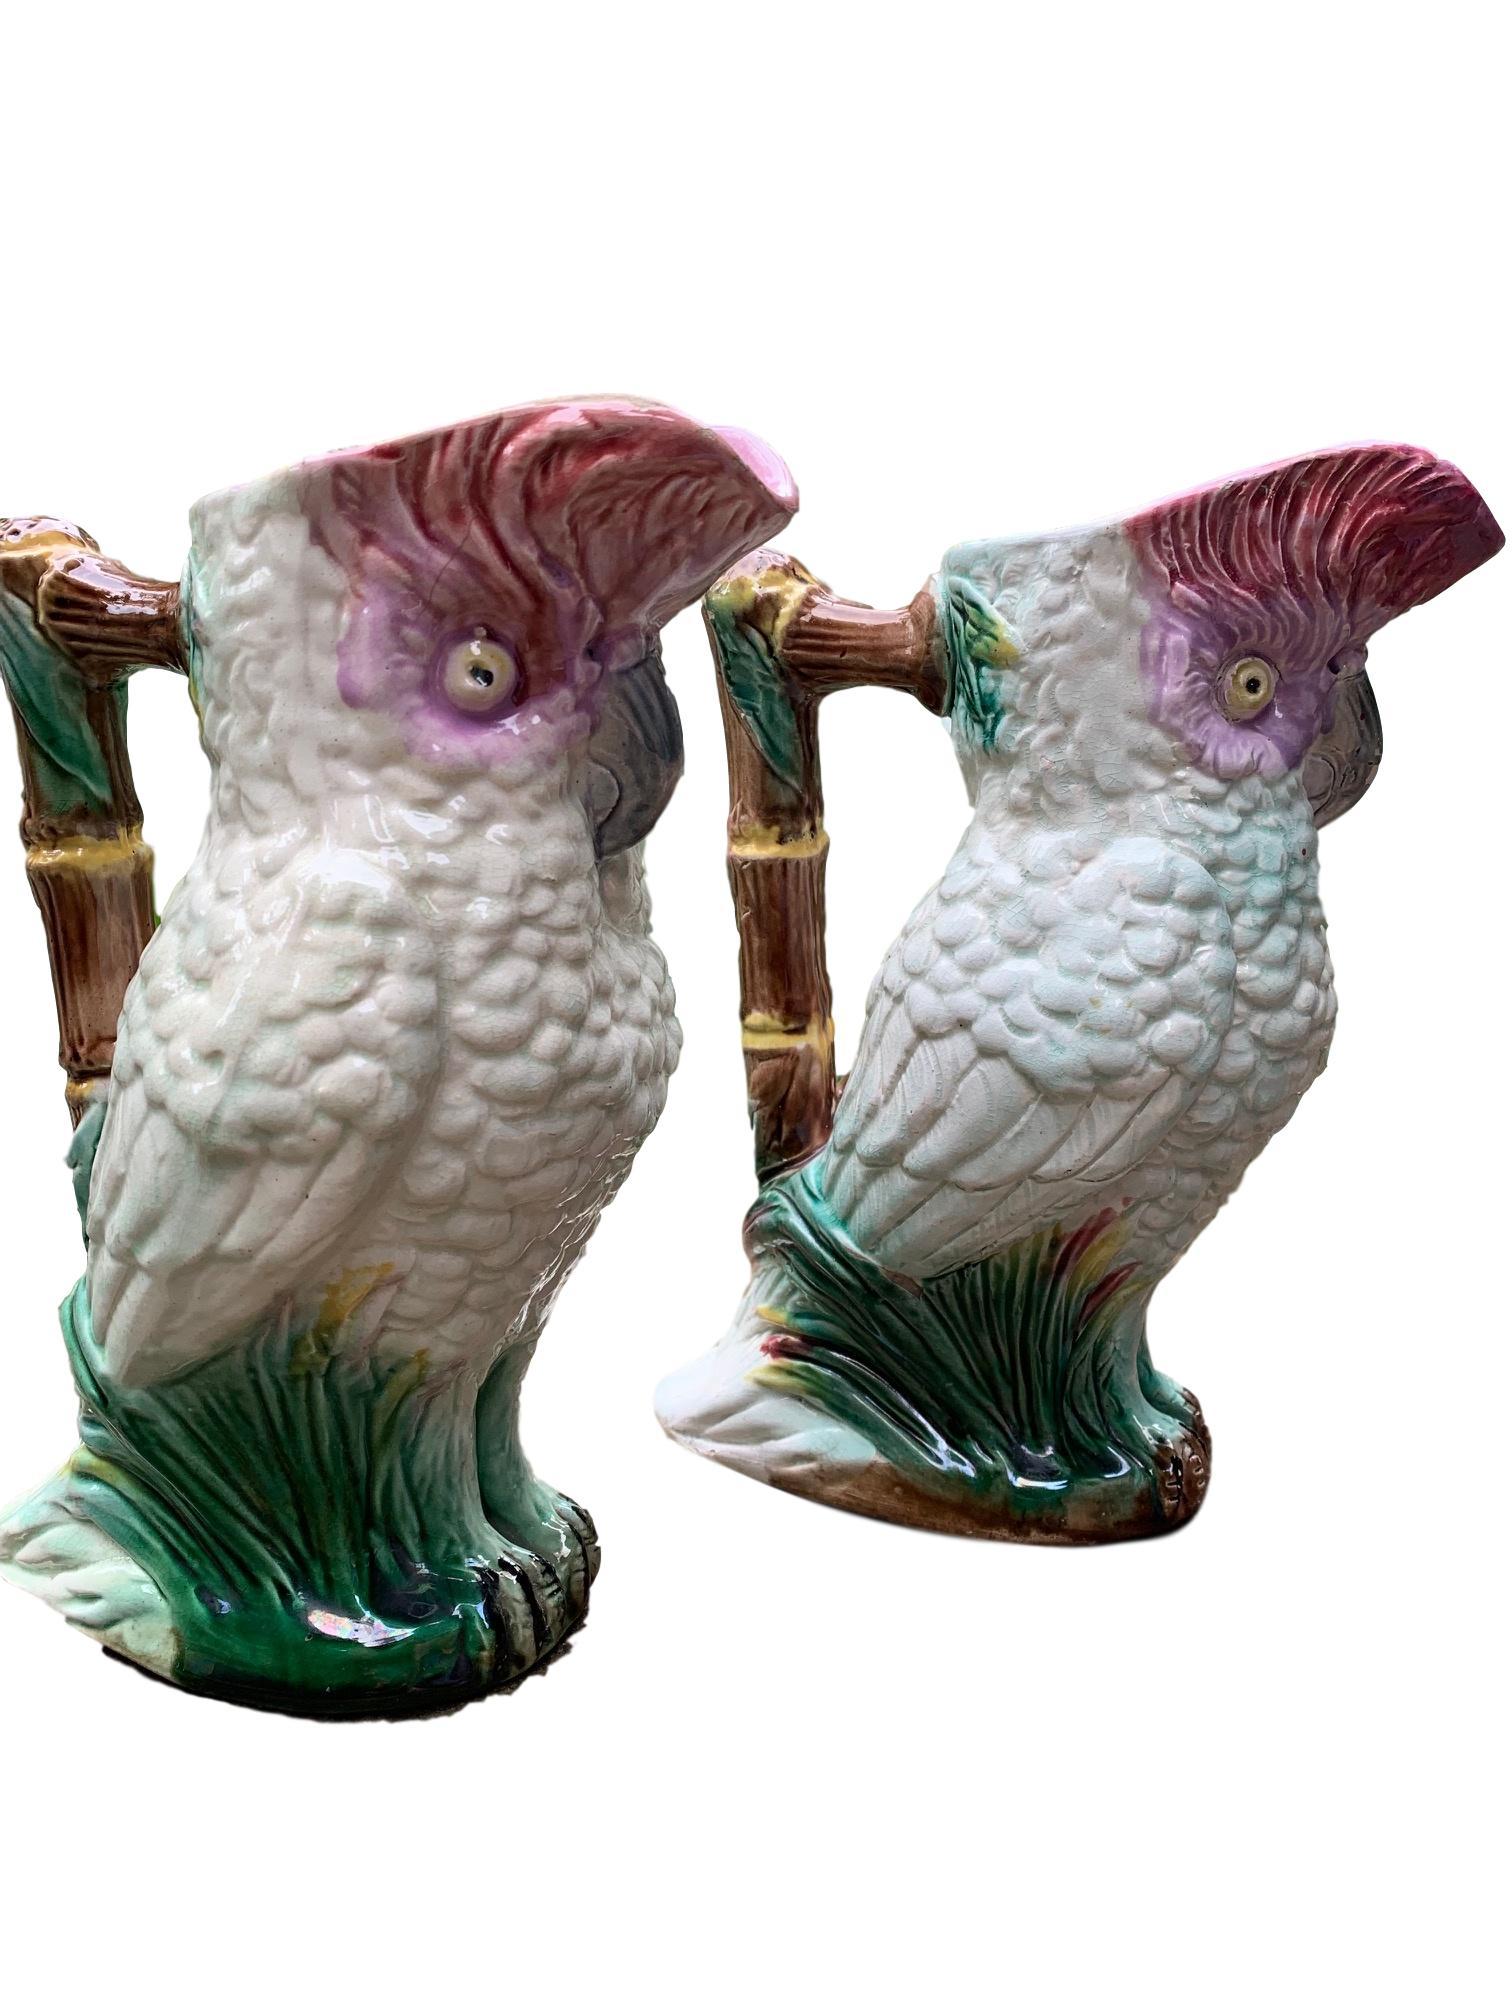 Beautiful pair of Majolica Cockatoo pitchers in good condition. Bright coloration with bamboo handle, circa 1800s. Slight wear consistent with age and use.